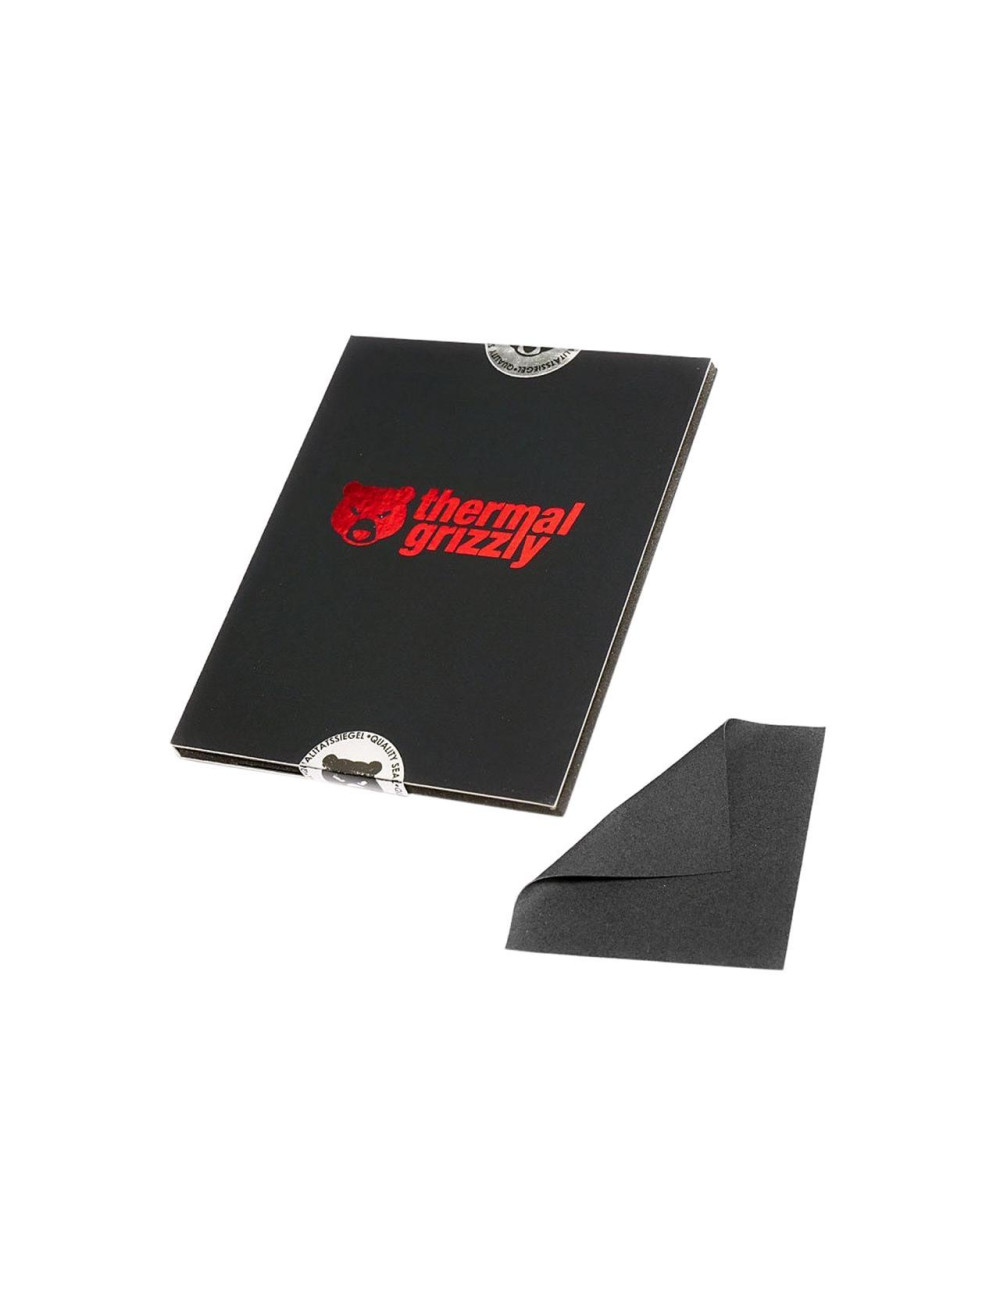 Thermal Grizzly Carbonaut Thermal Pad 38 x 38 x 0.2 mm